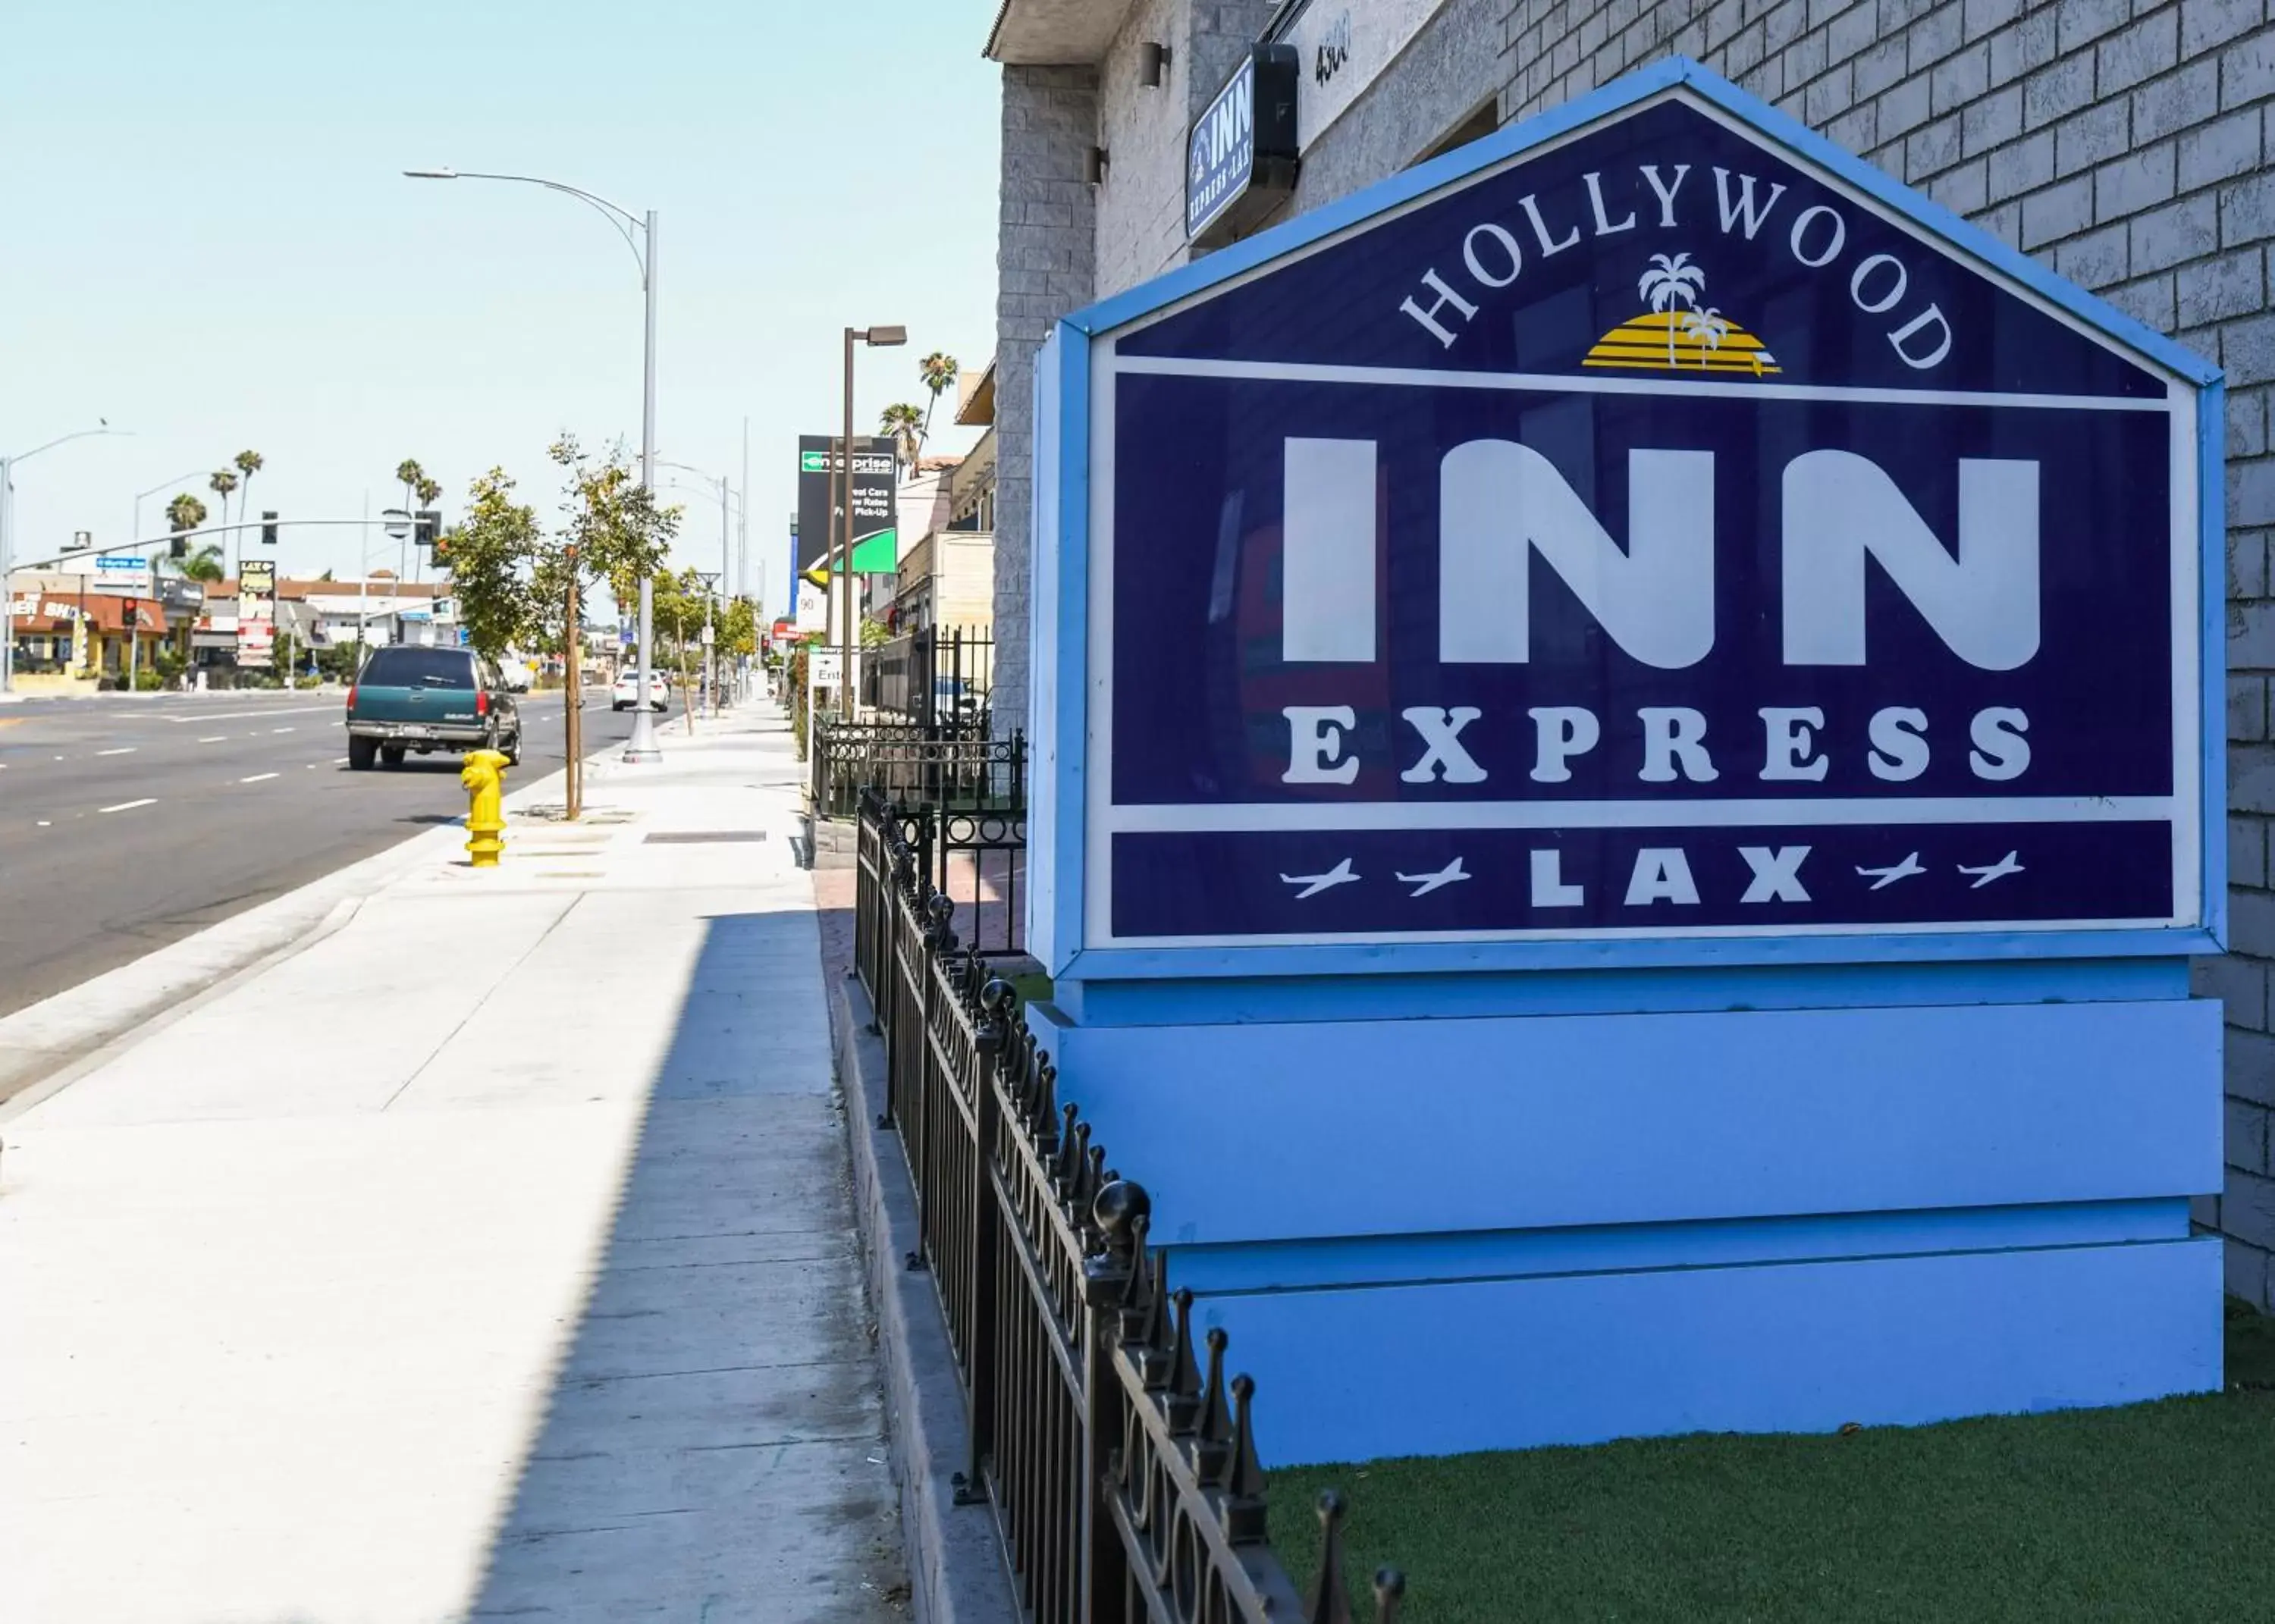 Property logo or sign in Hollywood Inn Express LAX